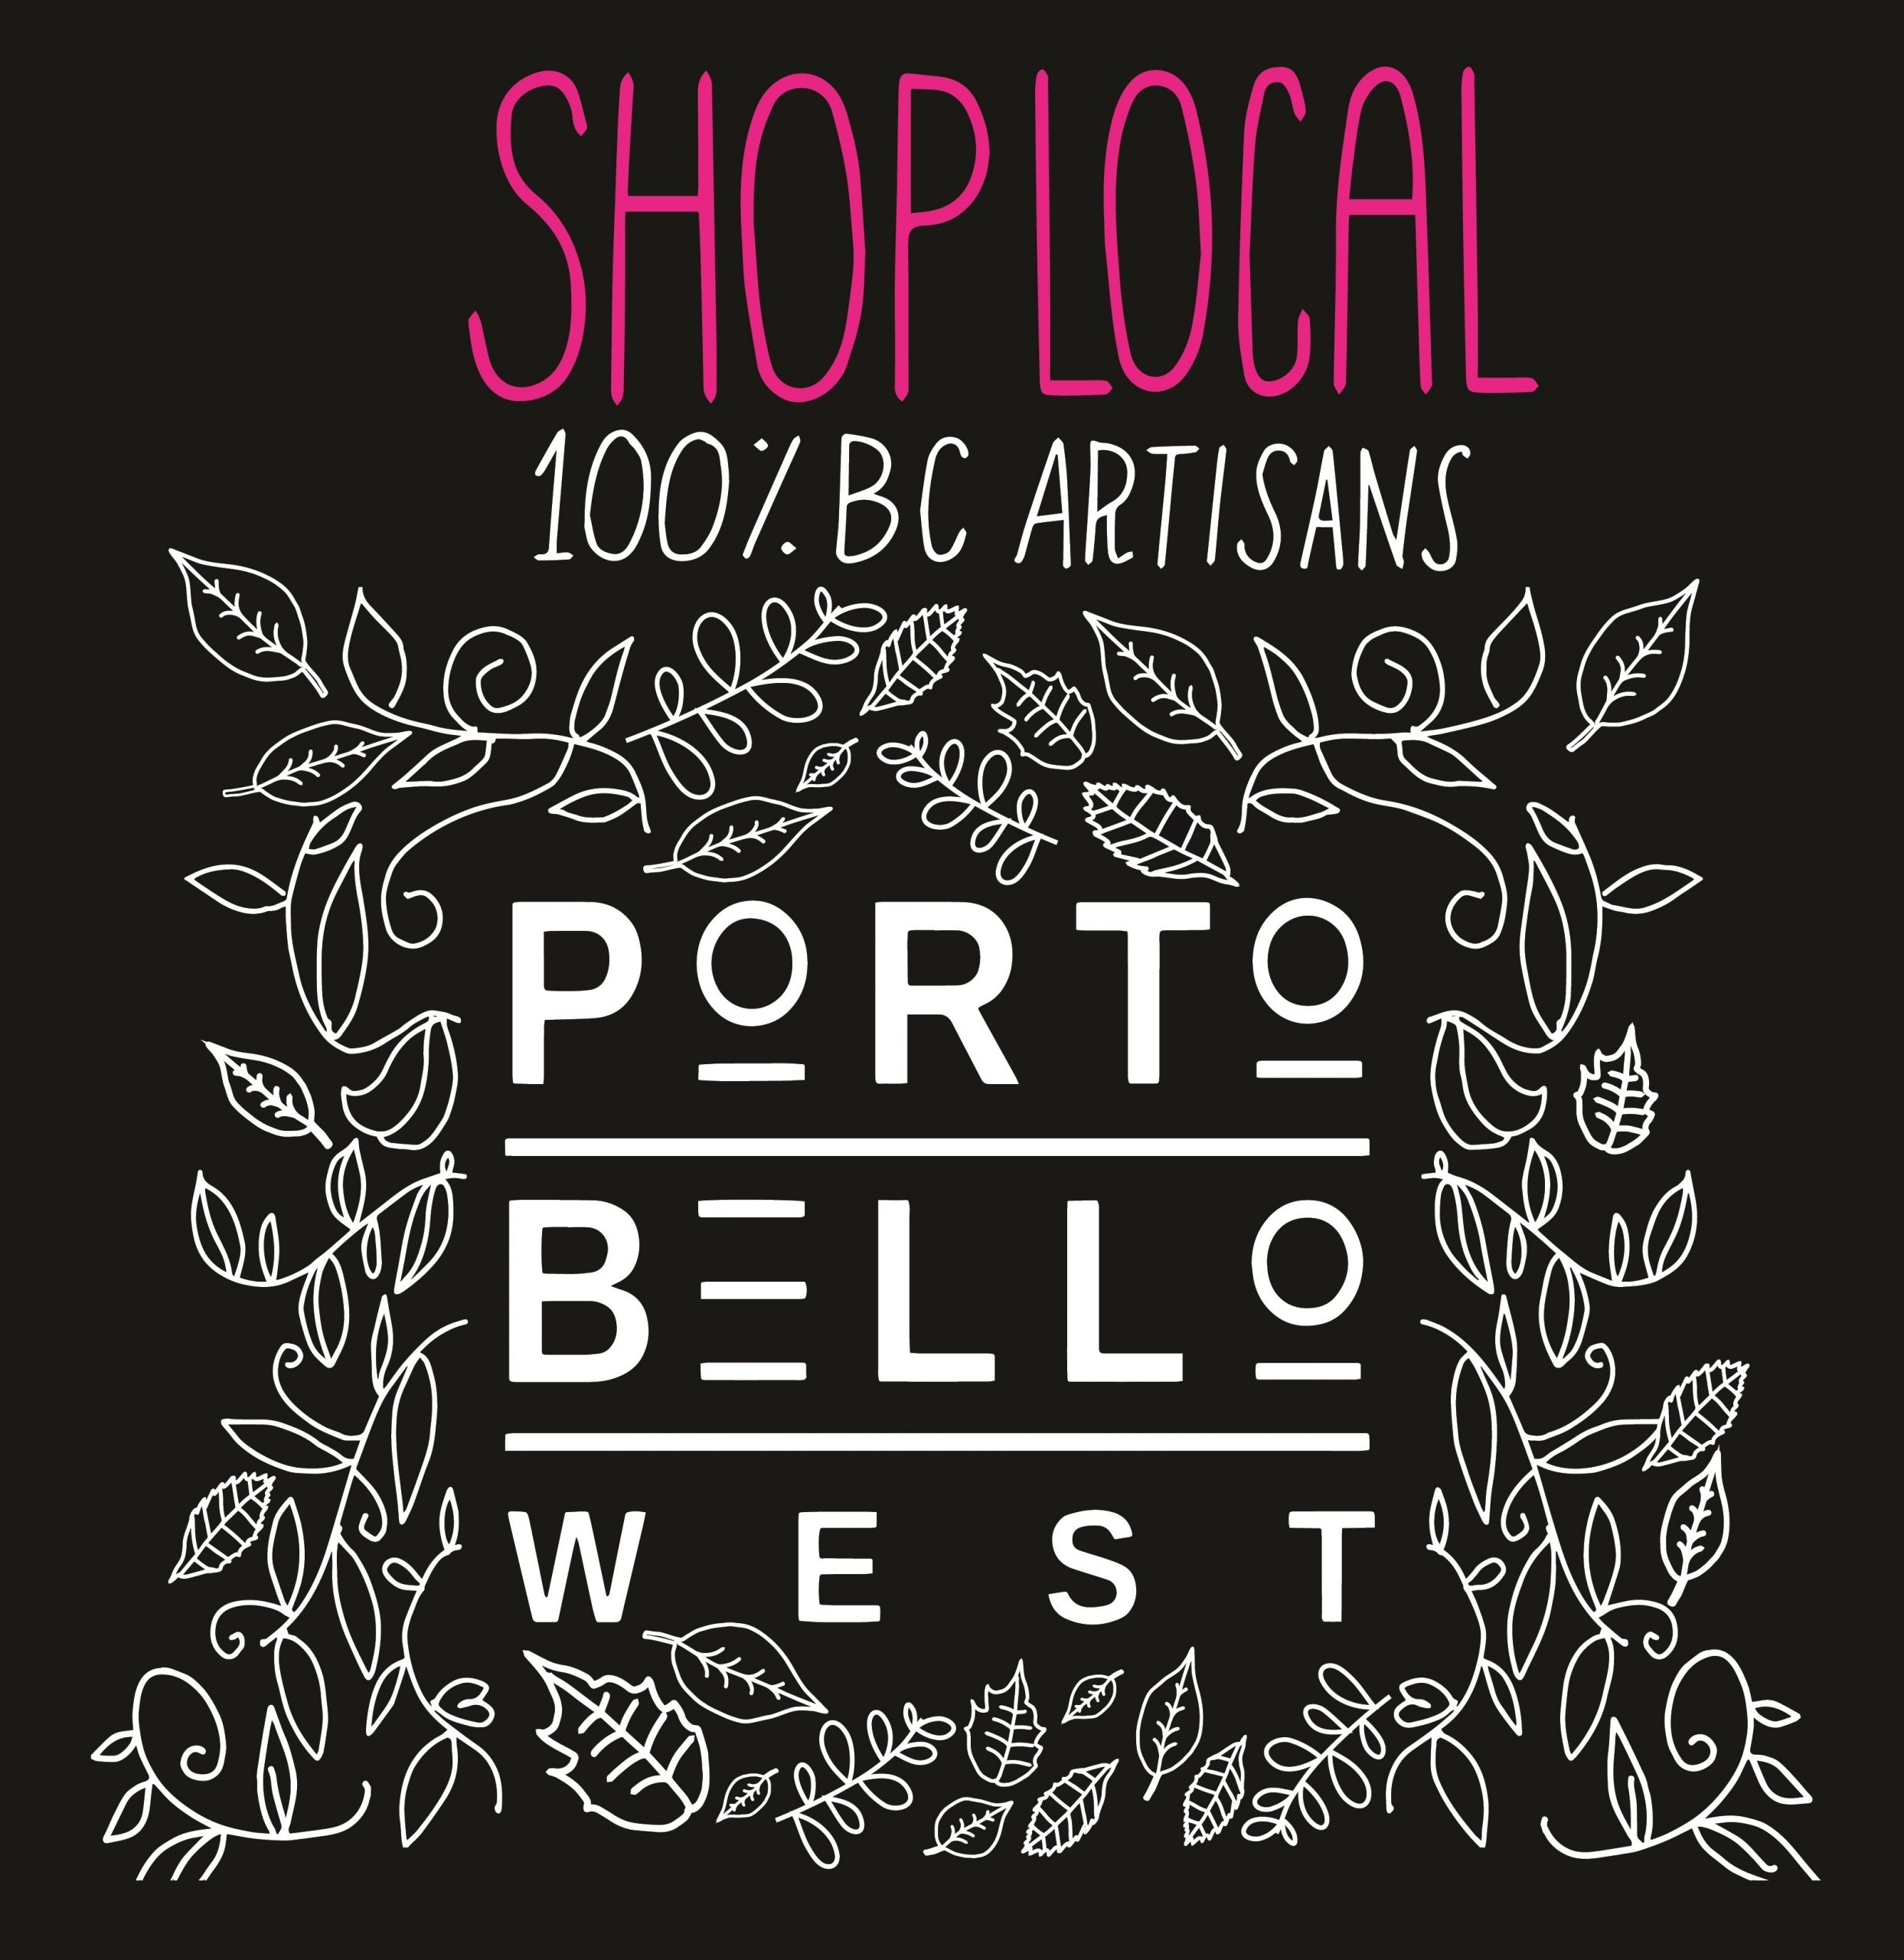 pw shop local scaled